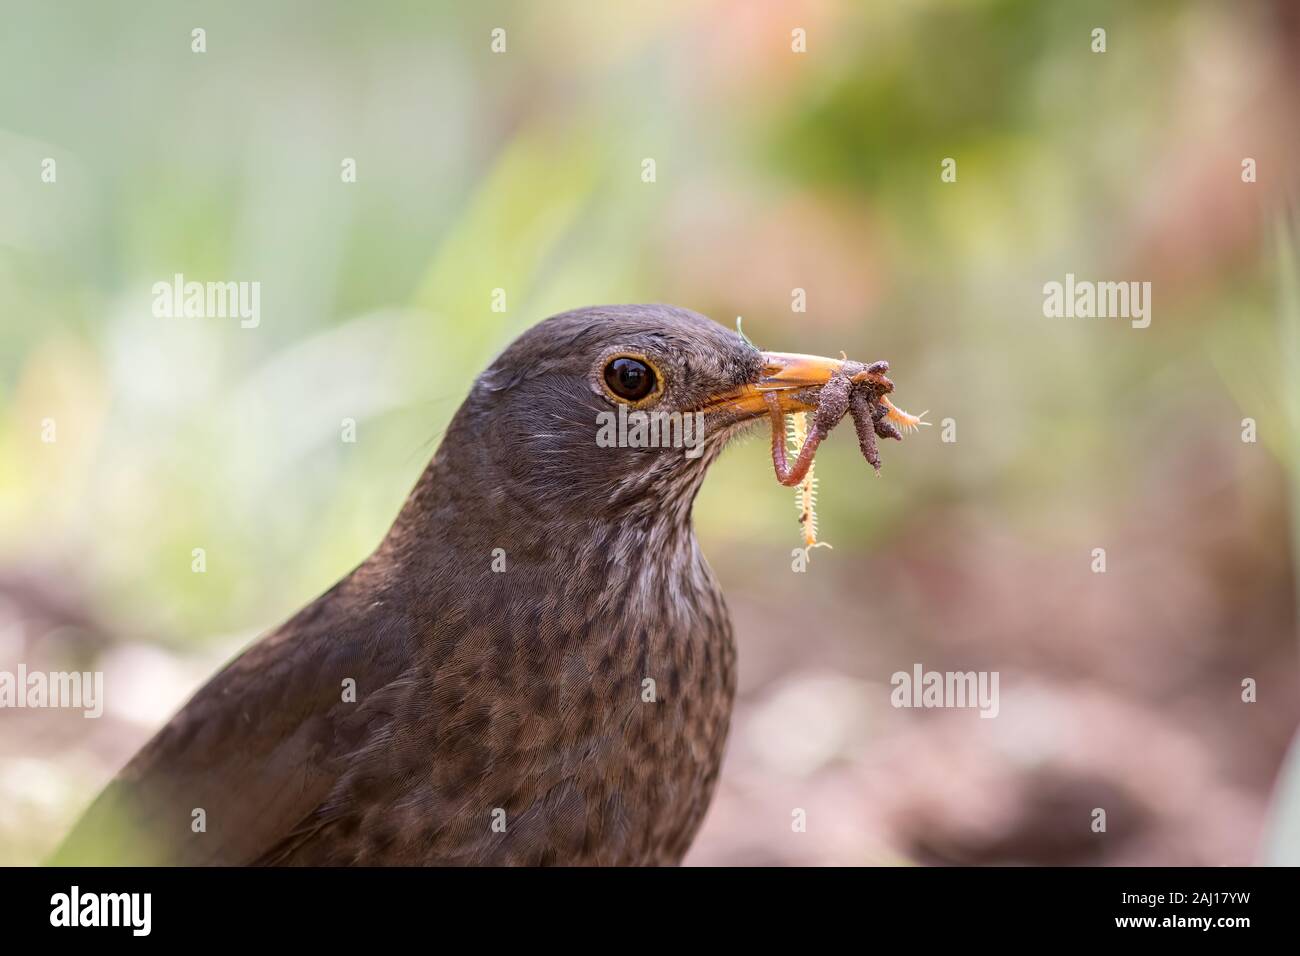 Female blackbird (Turdus merula). Garden bird with beak full of insects and worms. Close-up of foraging parent animal collecting food. Stock Photo